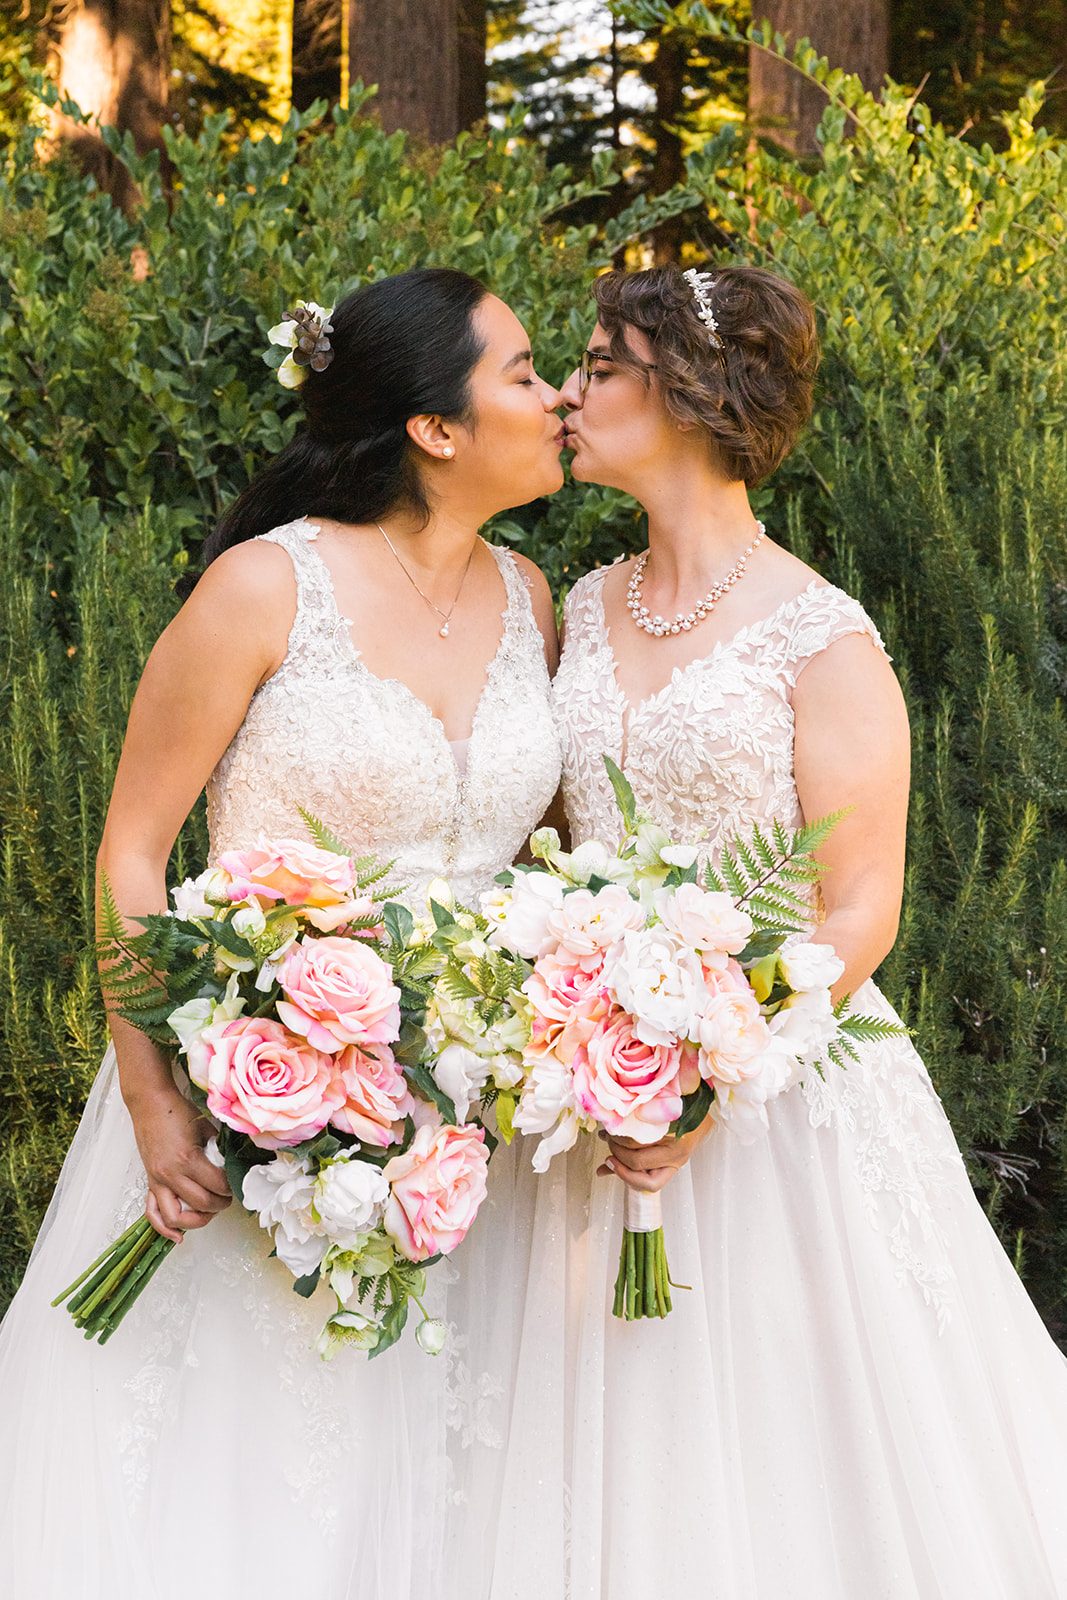 two brides in wedding gowns kissing while holding pink bouquets